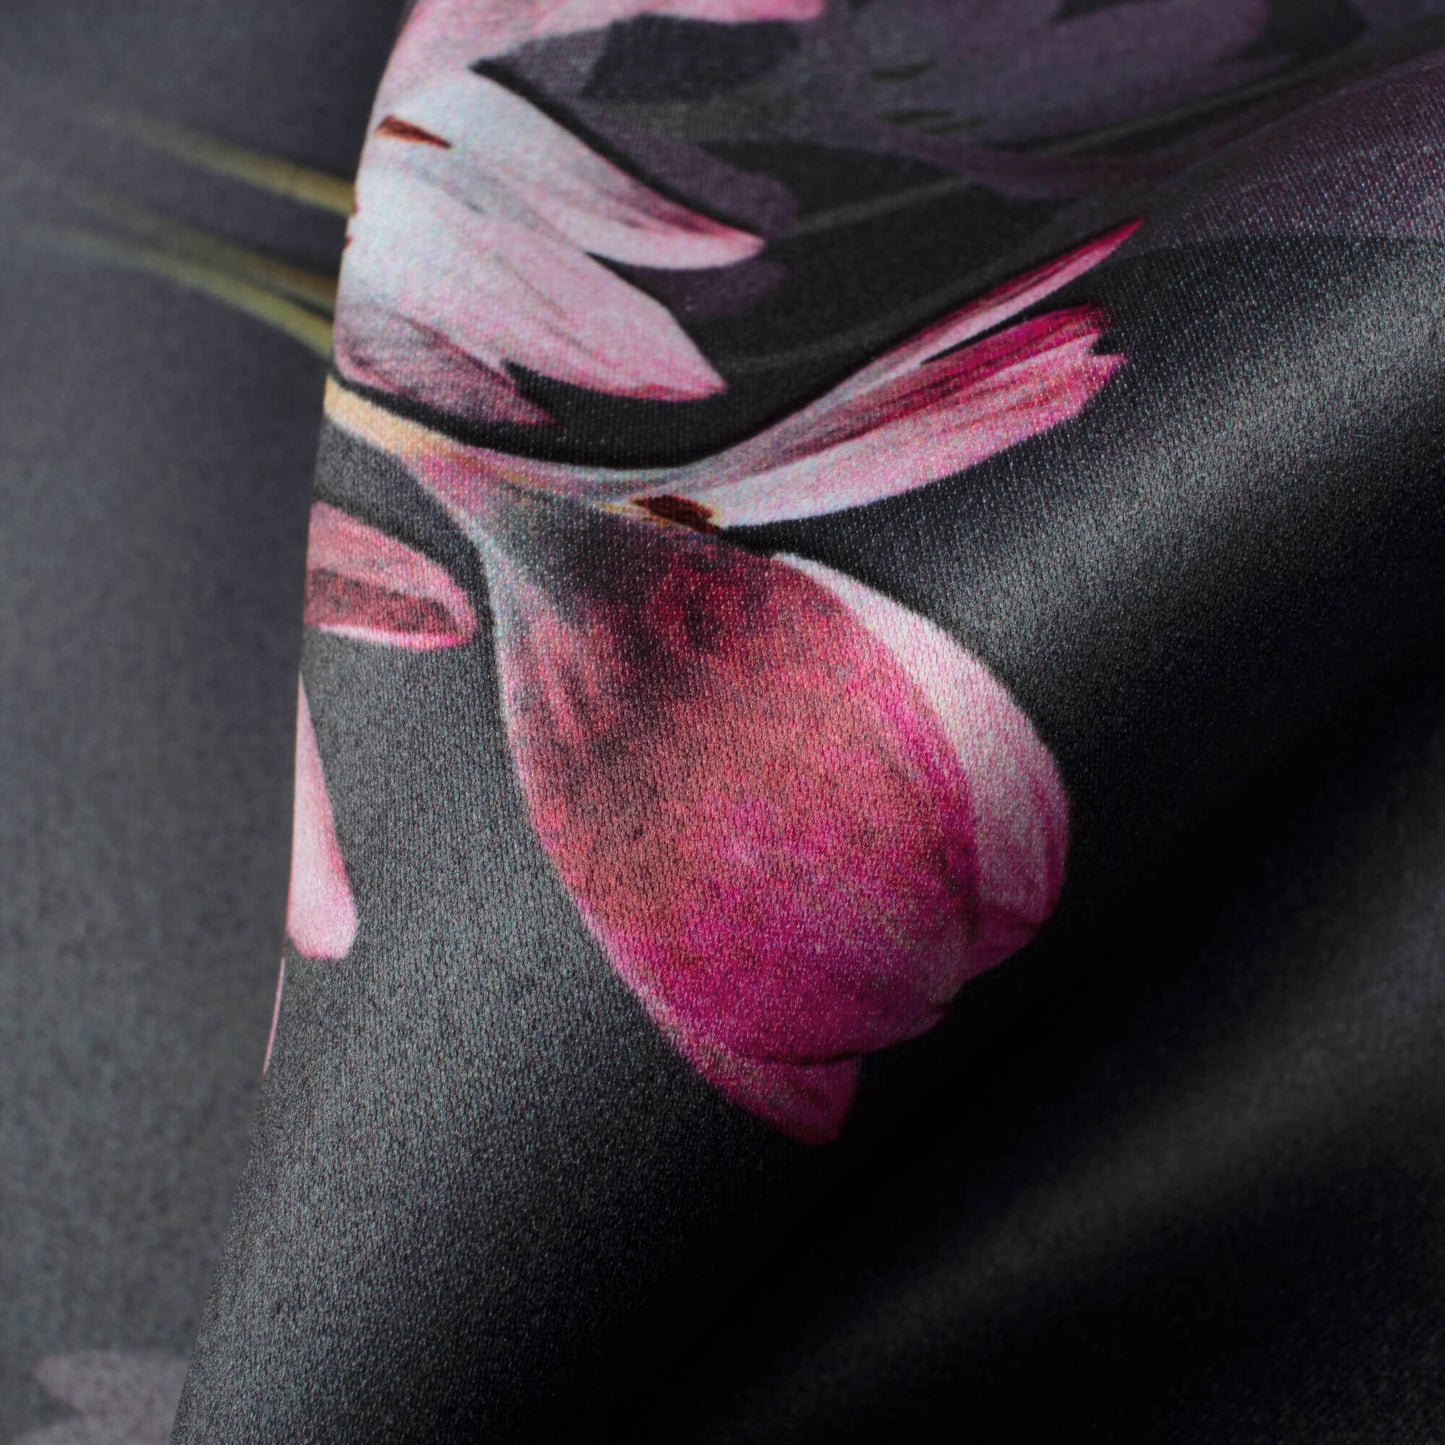 Black And Punch Pink Floral Pattern Digital Print Charmeuse Satin Fabric (Width 58 Inches)